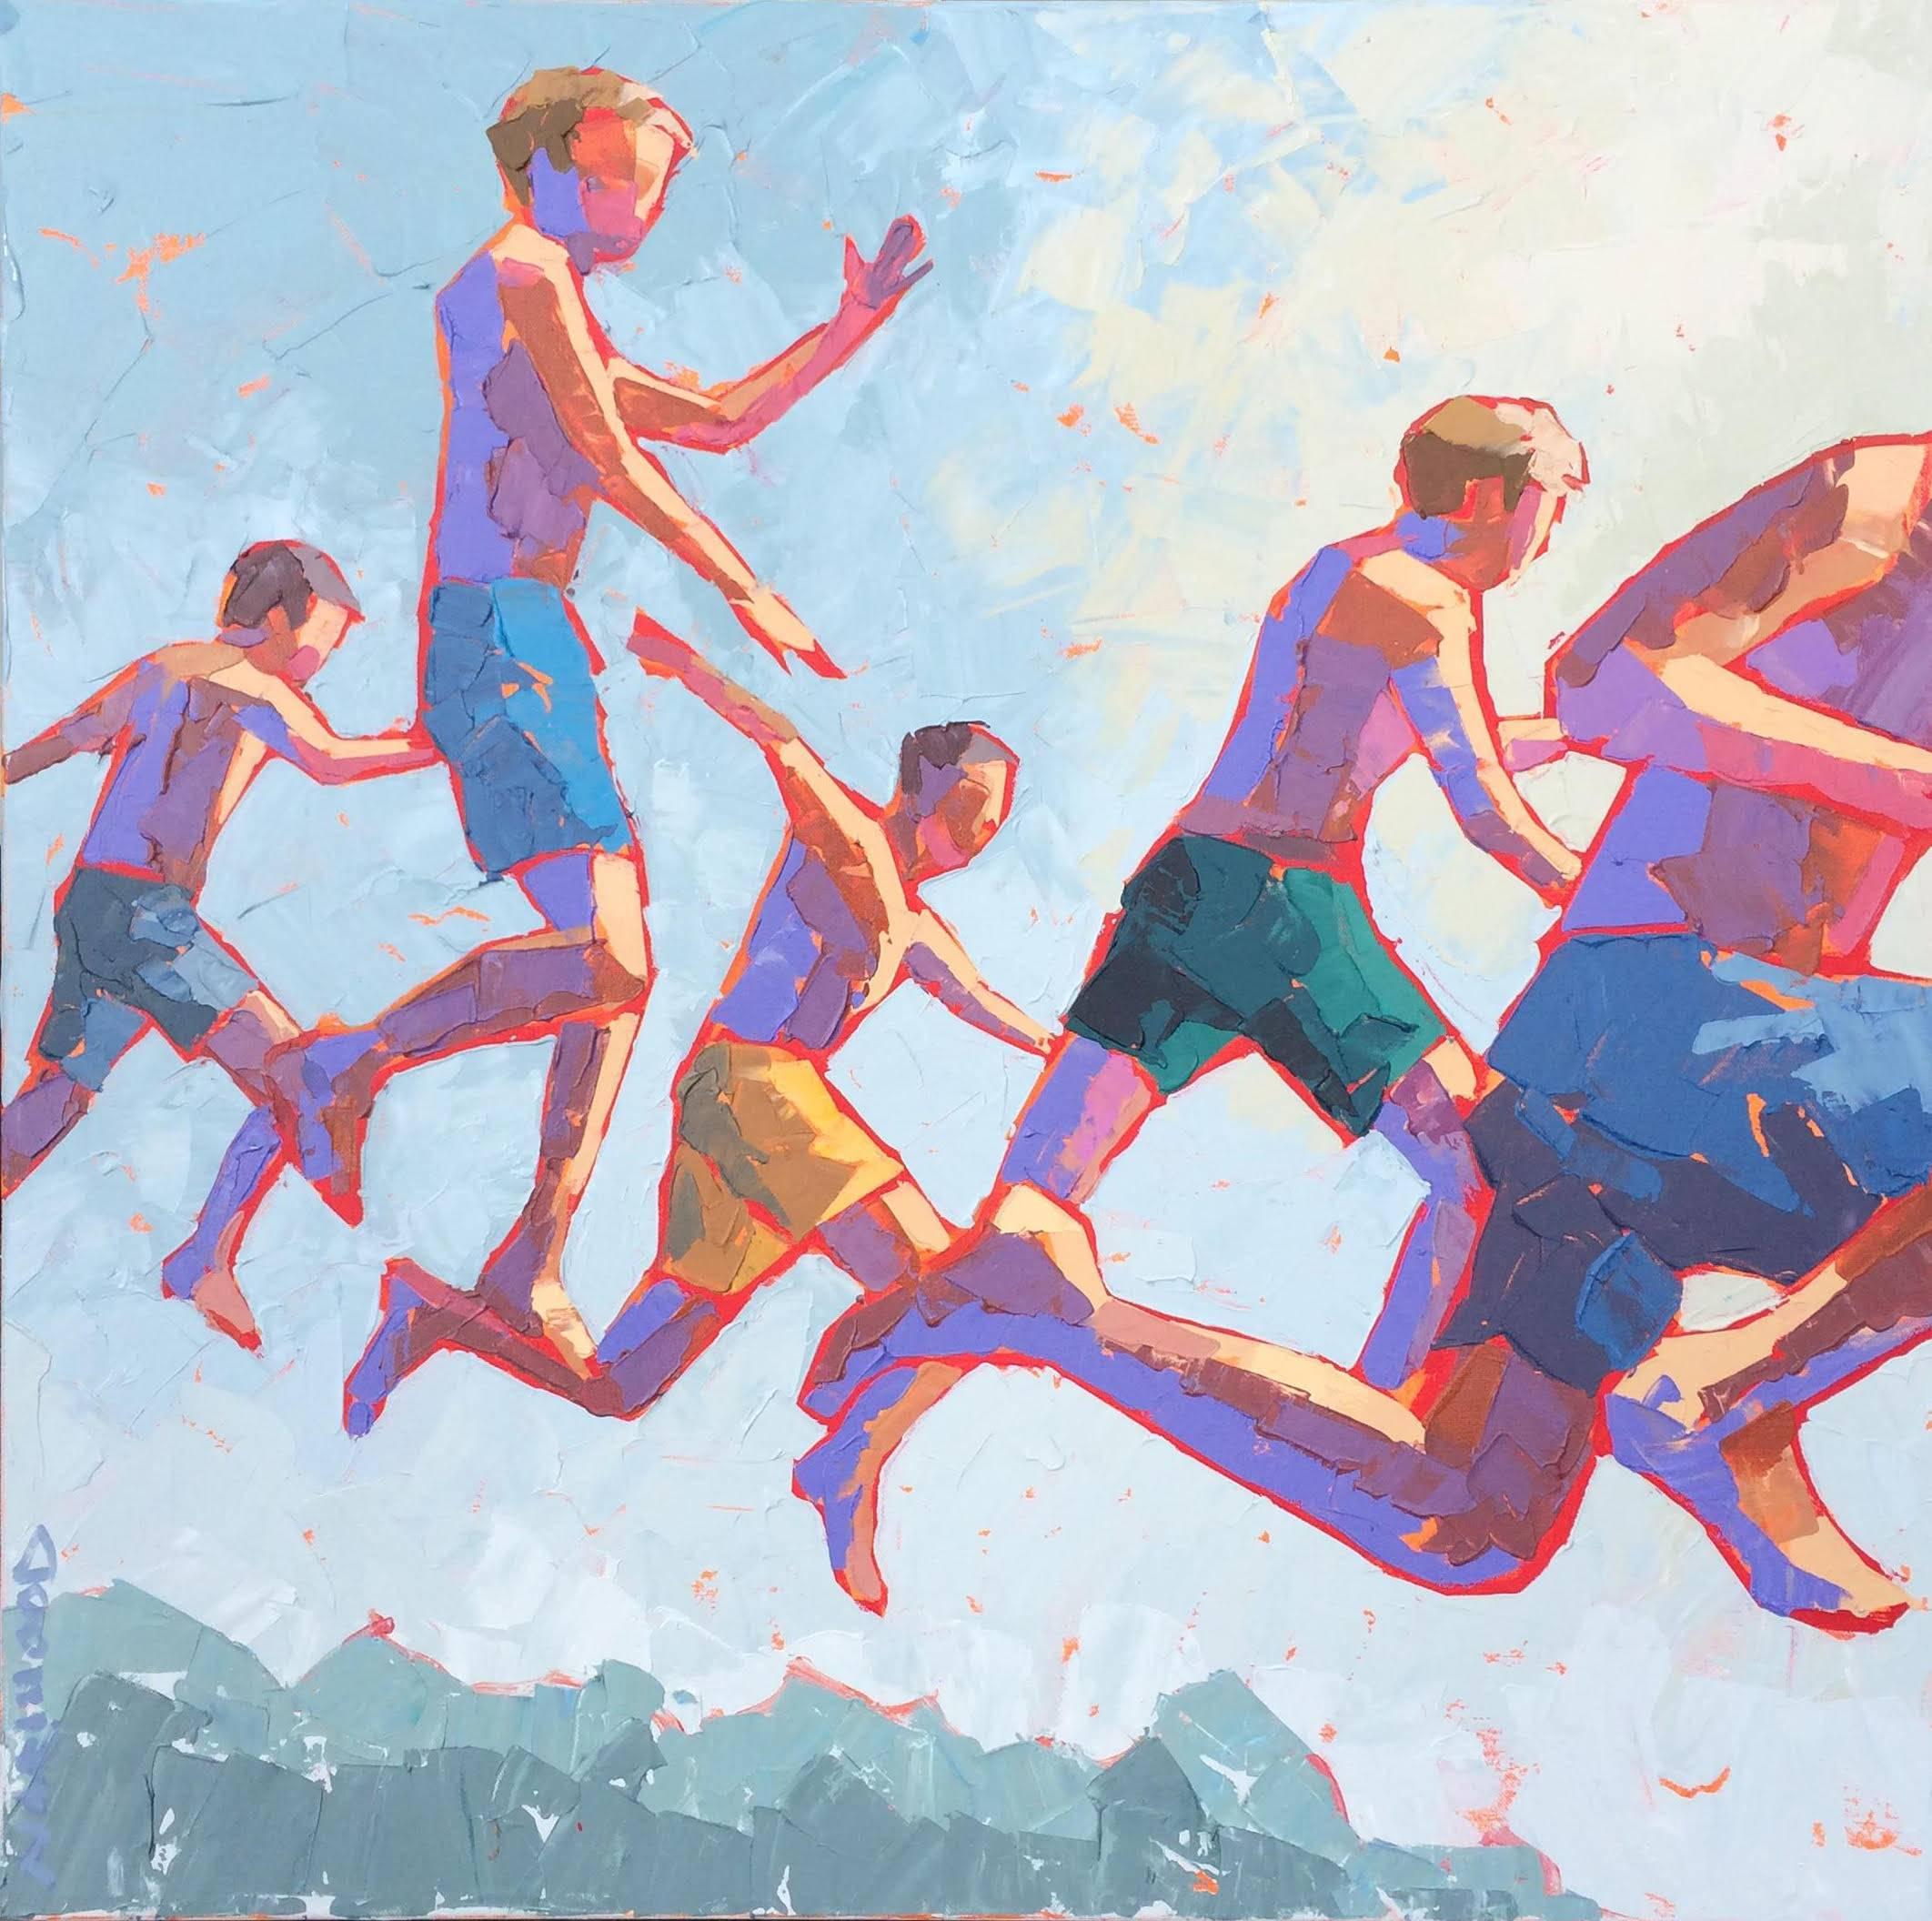 Paul Norwood Figurative Painting - "Mid Air" Boys in Breen Blue and Yellow Bathing Suits Jumping into Water